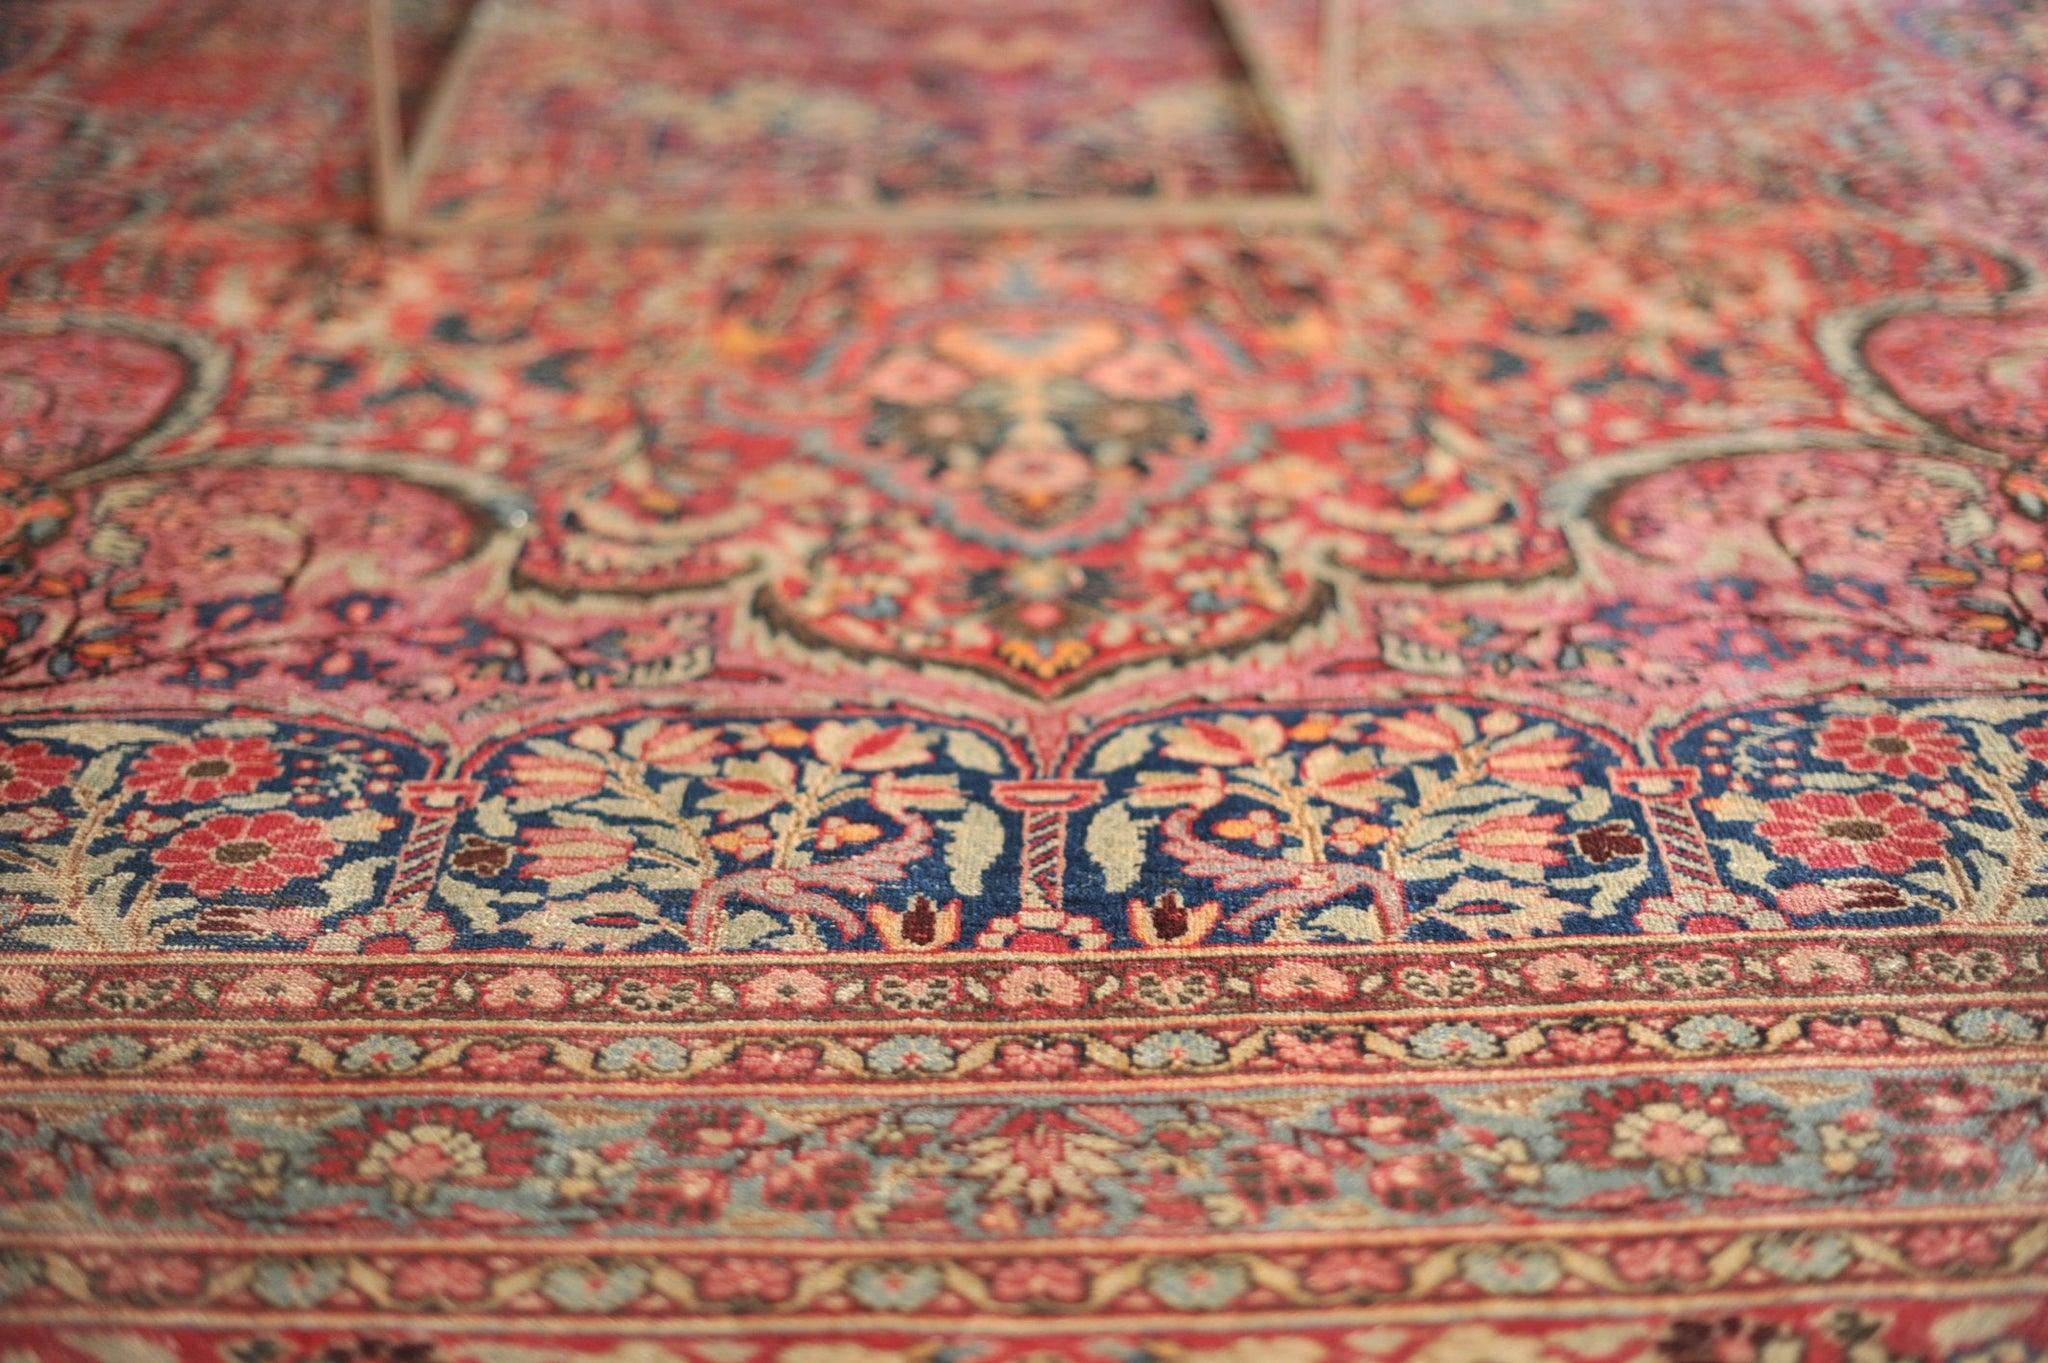 Madonna magnificent antique rug in pastels with every color & detail

About this rug: We have named this piece Madonna for a reason - this piece is truly iconic. To think about what it took to weave this rug gives me the chills. Every single knot